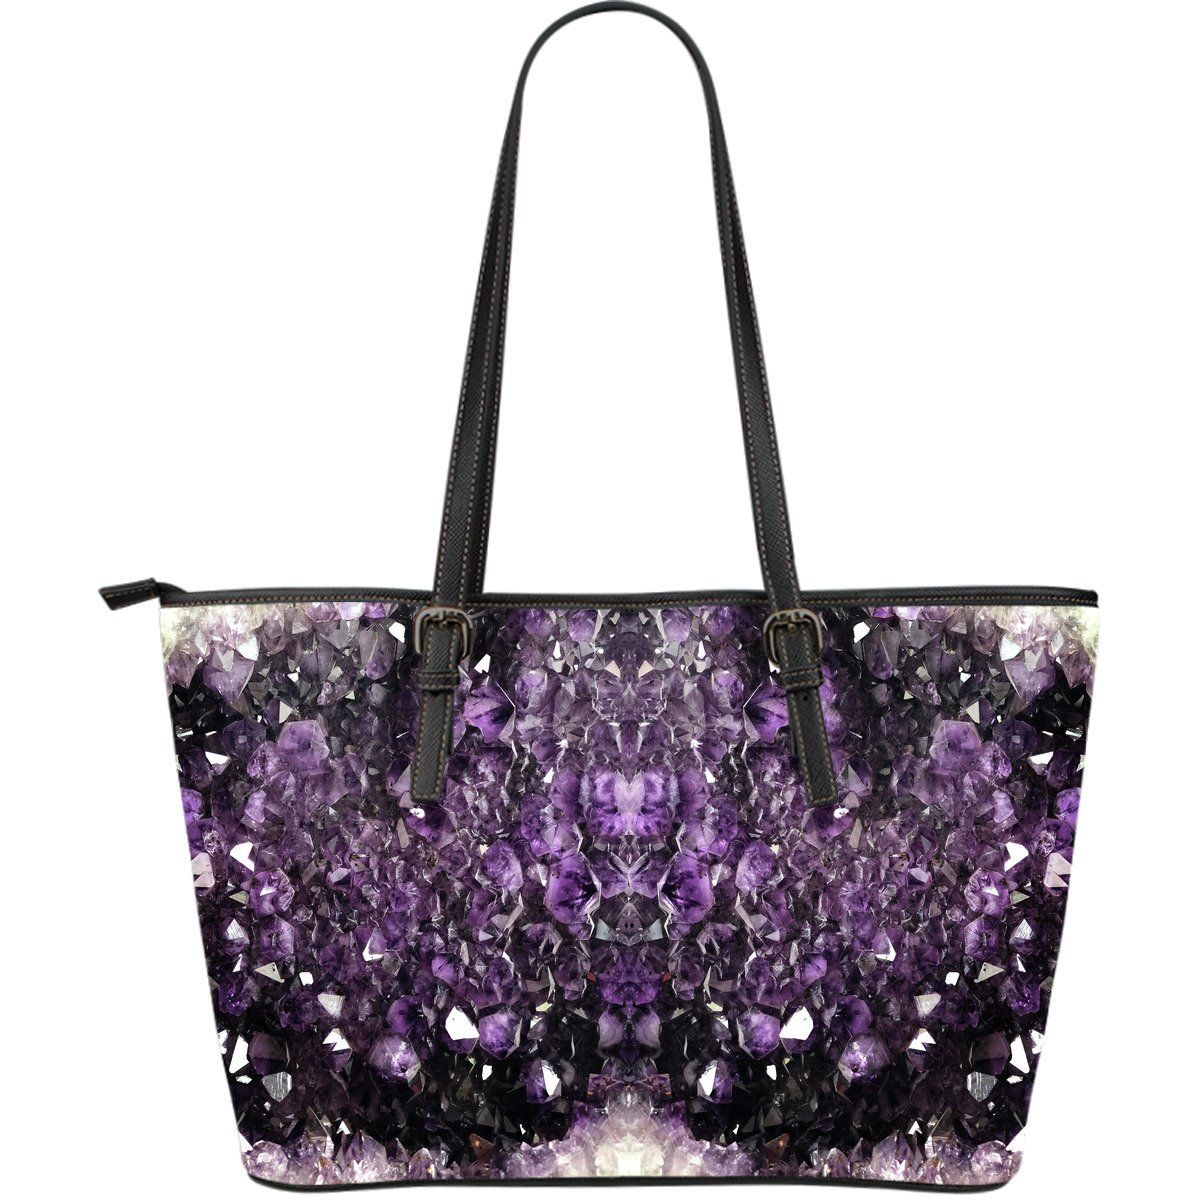 Amethyst Visions - Big artificial leather bag